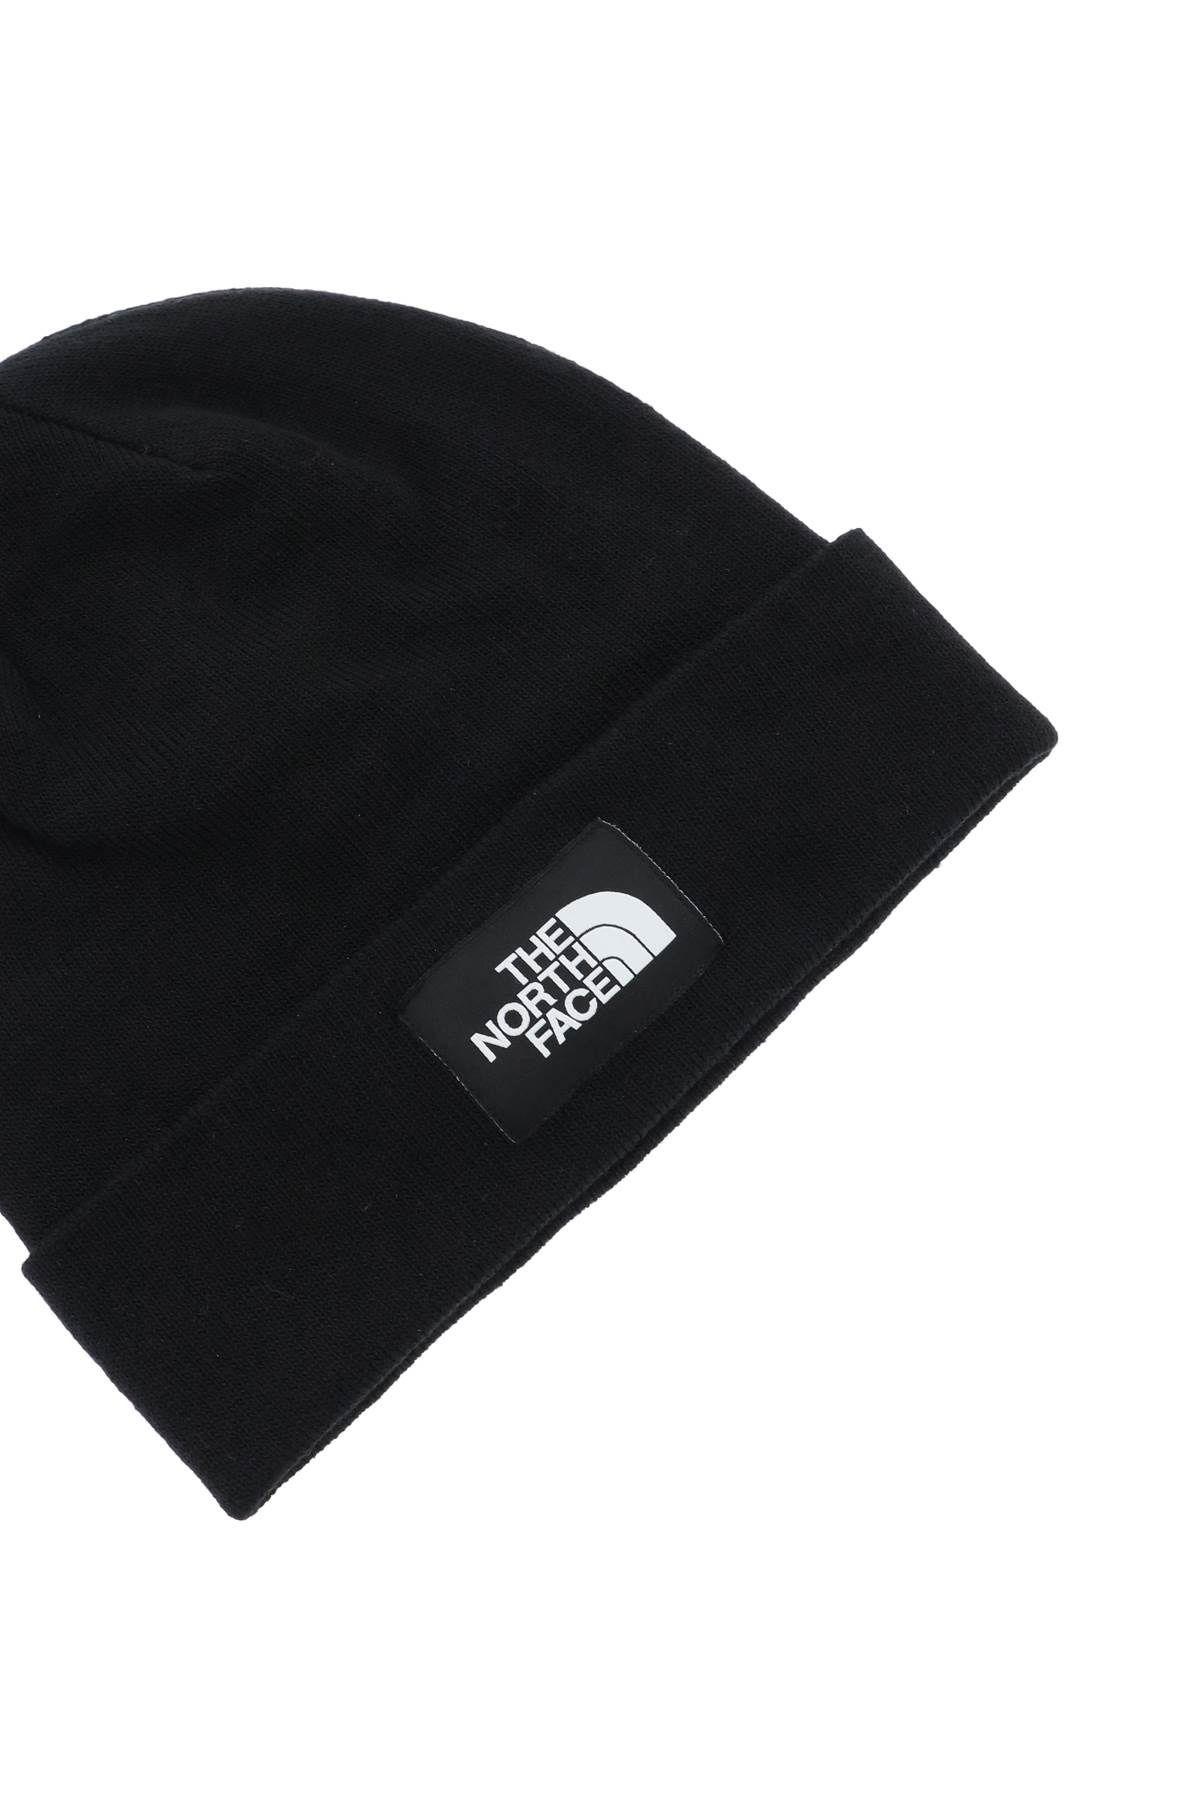 Dock Worker beanie hat The North Face - 3